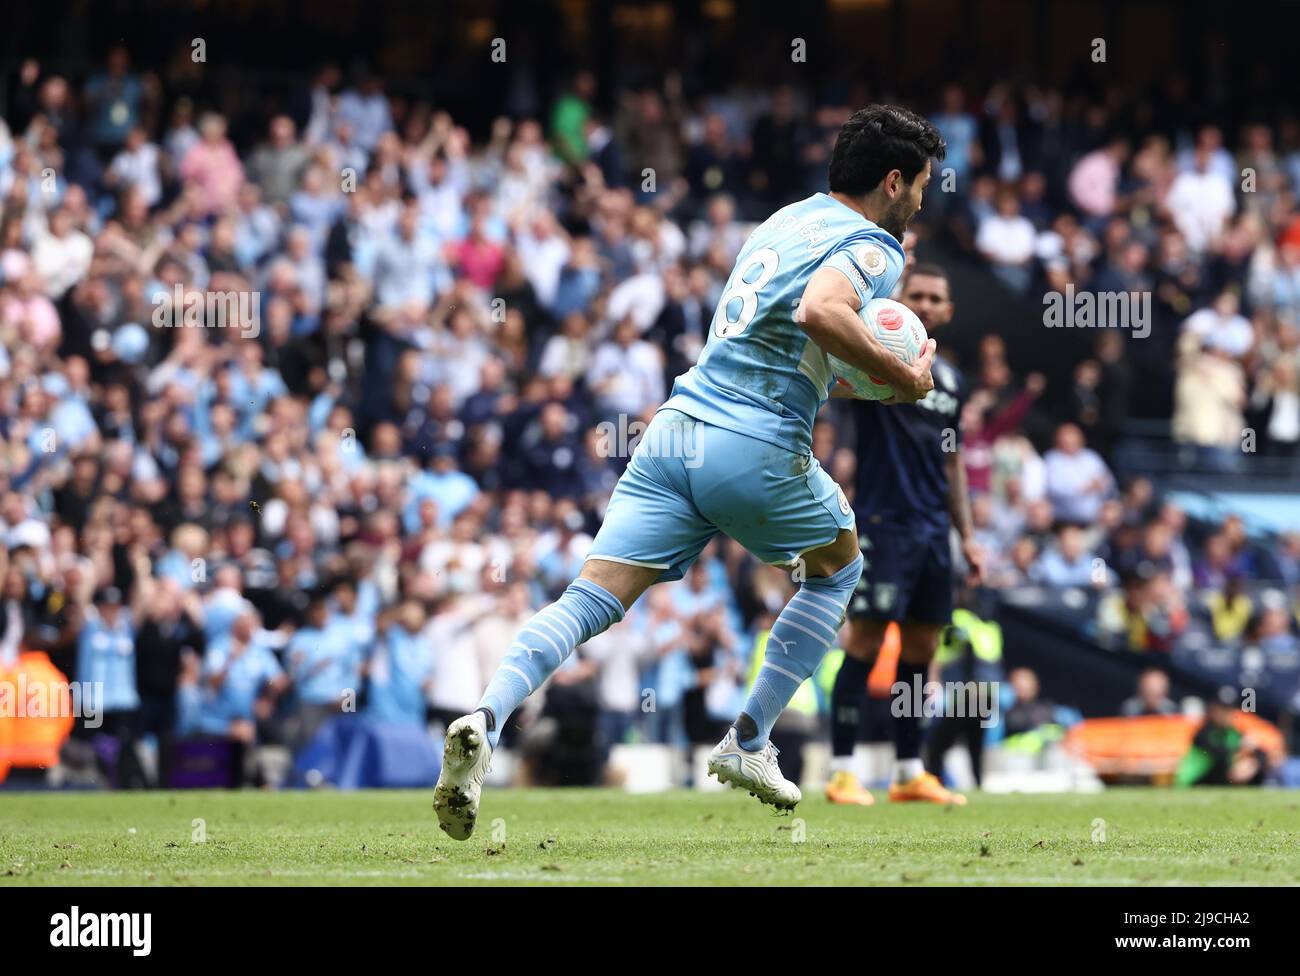 Manchester, UK. 22nd May, 2022. Ilkay Gundogan of Manchester City grabs the ball and heads back to kick off again following his goal during the Premier League match at the Etihad Stadium, Manchester. Picture credit should read: Darren Staples/Sportimage Credit: Sportimage/Alamy Live News Stock Photo